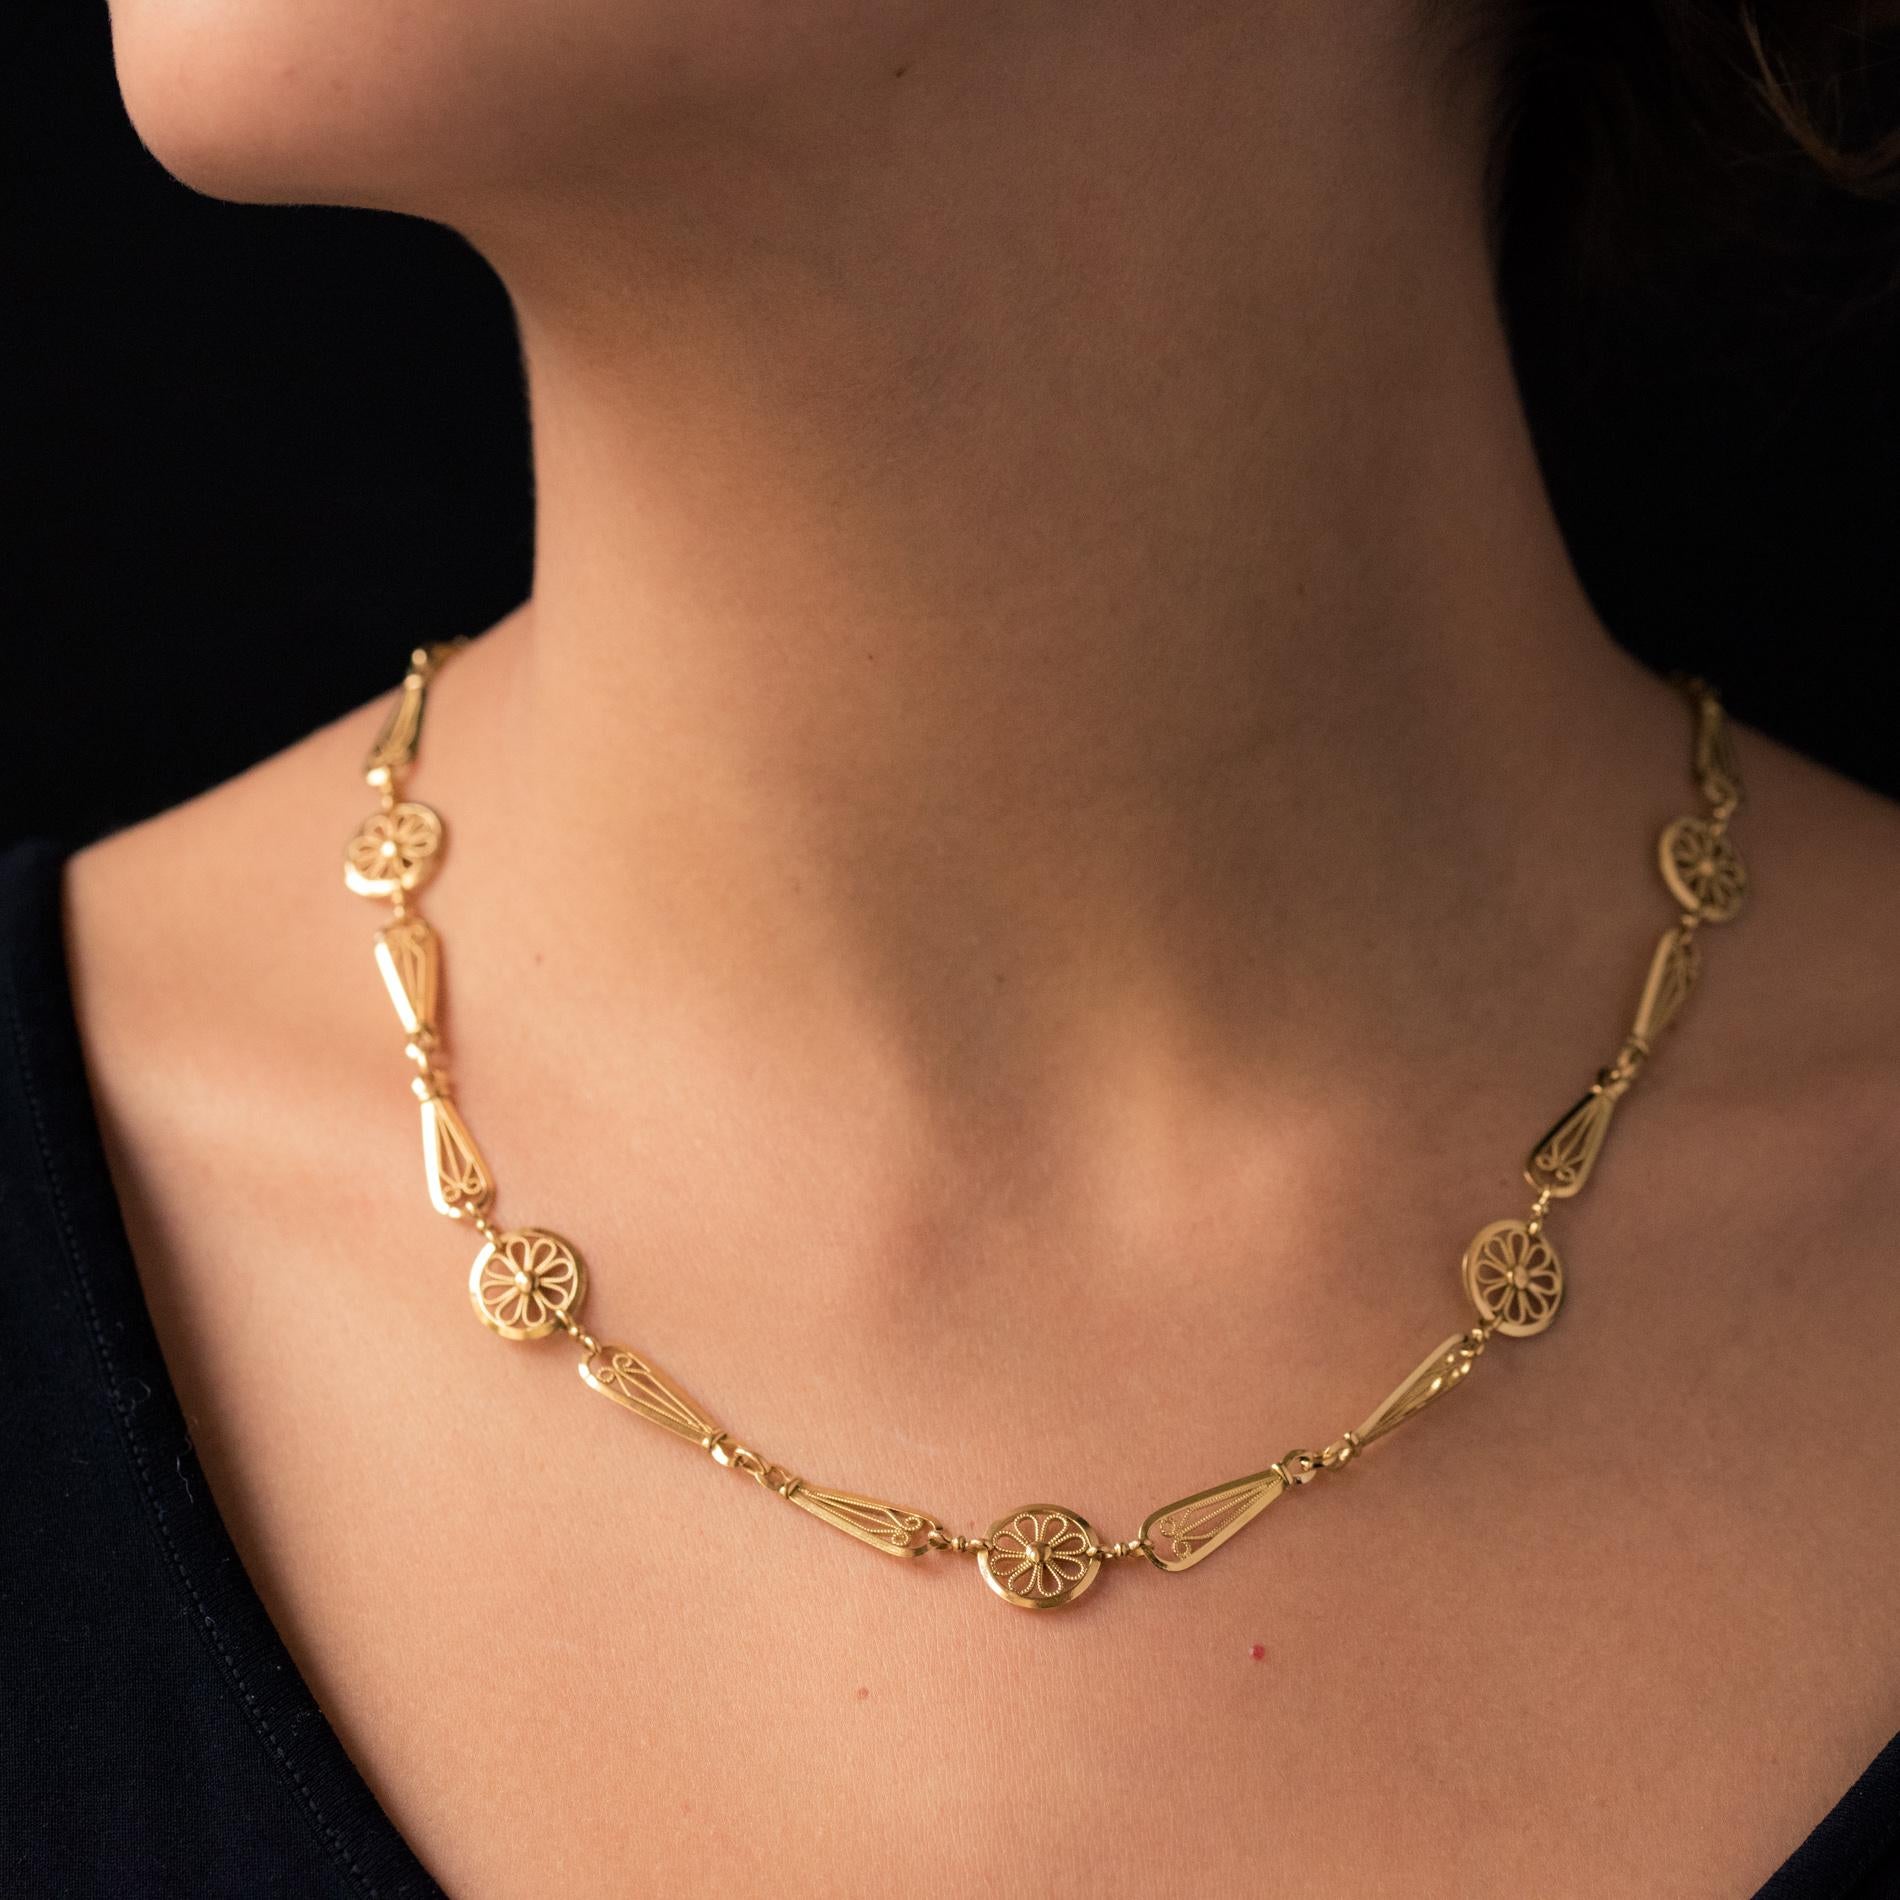 Chain in 18 karat yellow gold, rhinoceros' head and eagle's head hallmarks.
This necklace is made up of openwork discs of filigree flowers, each retained by two pear motifs with the same decor. The clip is a spring ring.
Length: 49 cm, width: 1.2